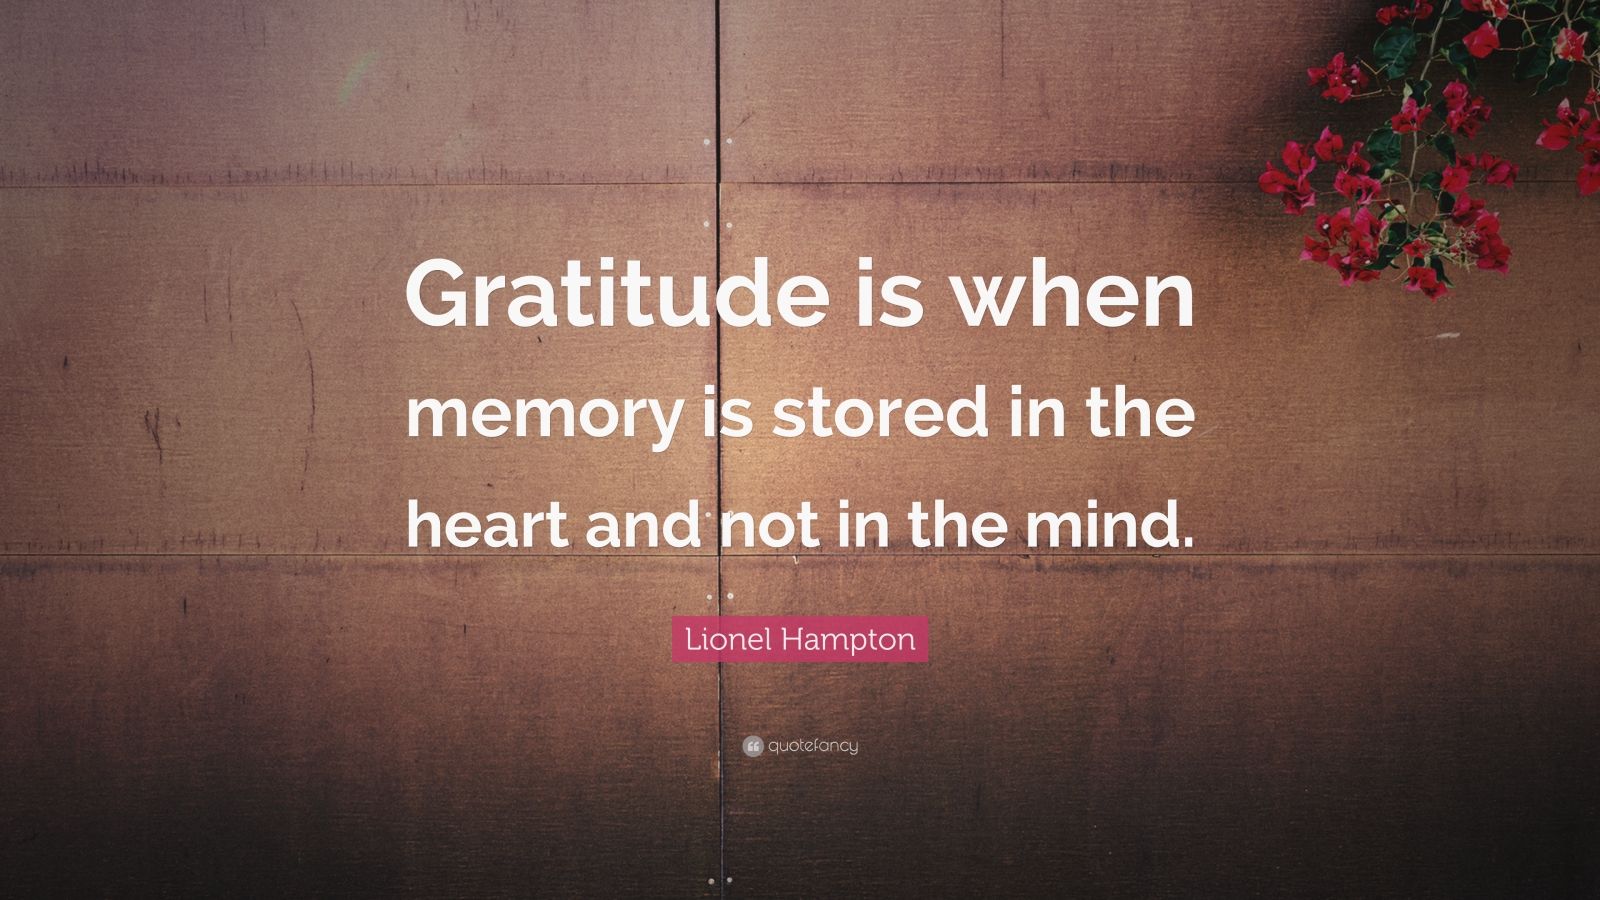 Lionel Hampton Quote: “Gratitude is when memory is stored in the heart ...